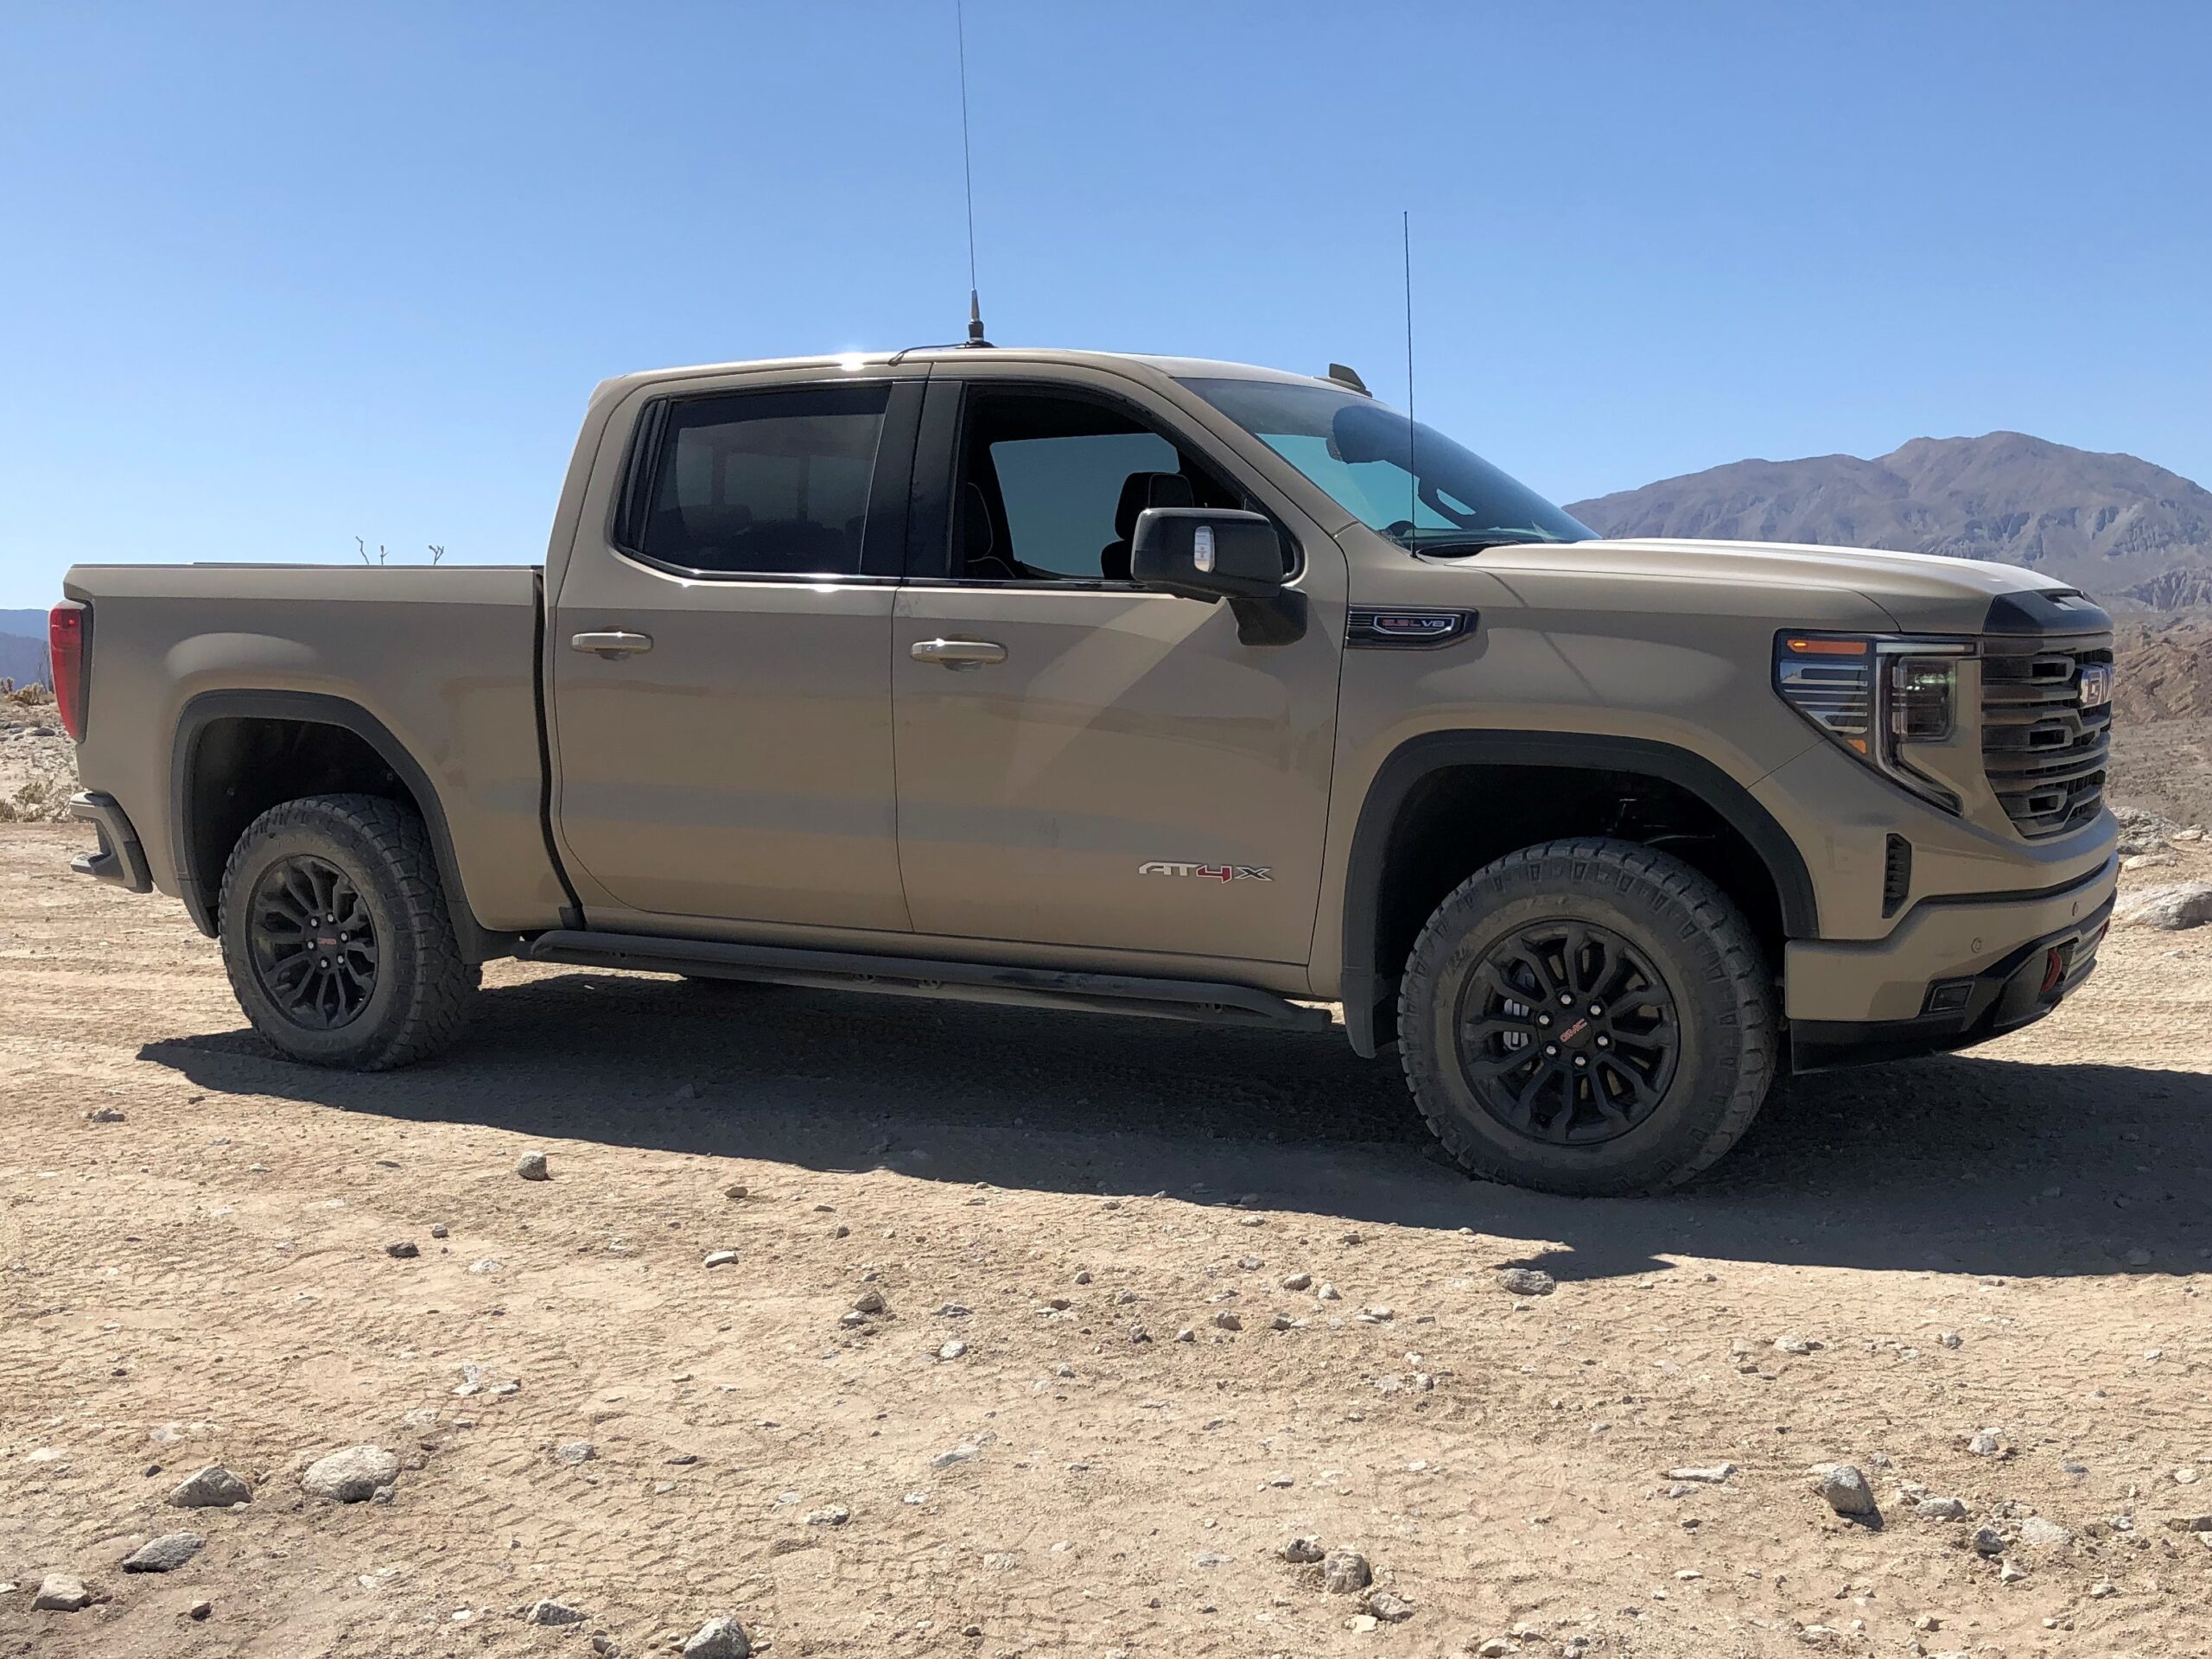 Truck Review: The GMC Sierra AT4X Blends Luxury with Off-Road Capability